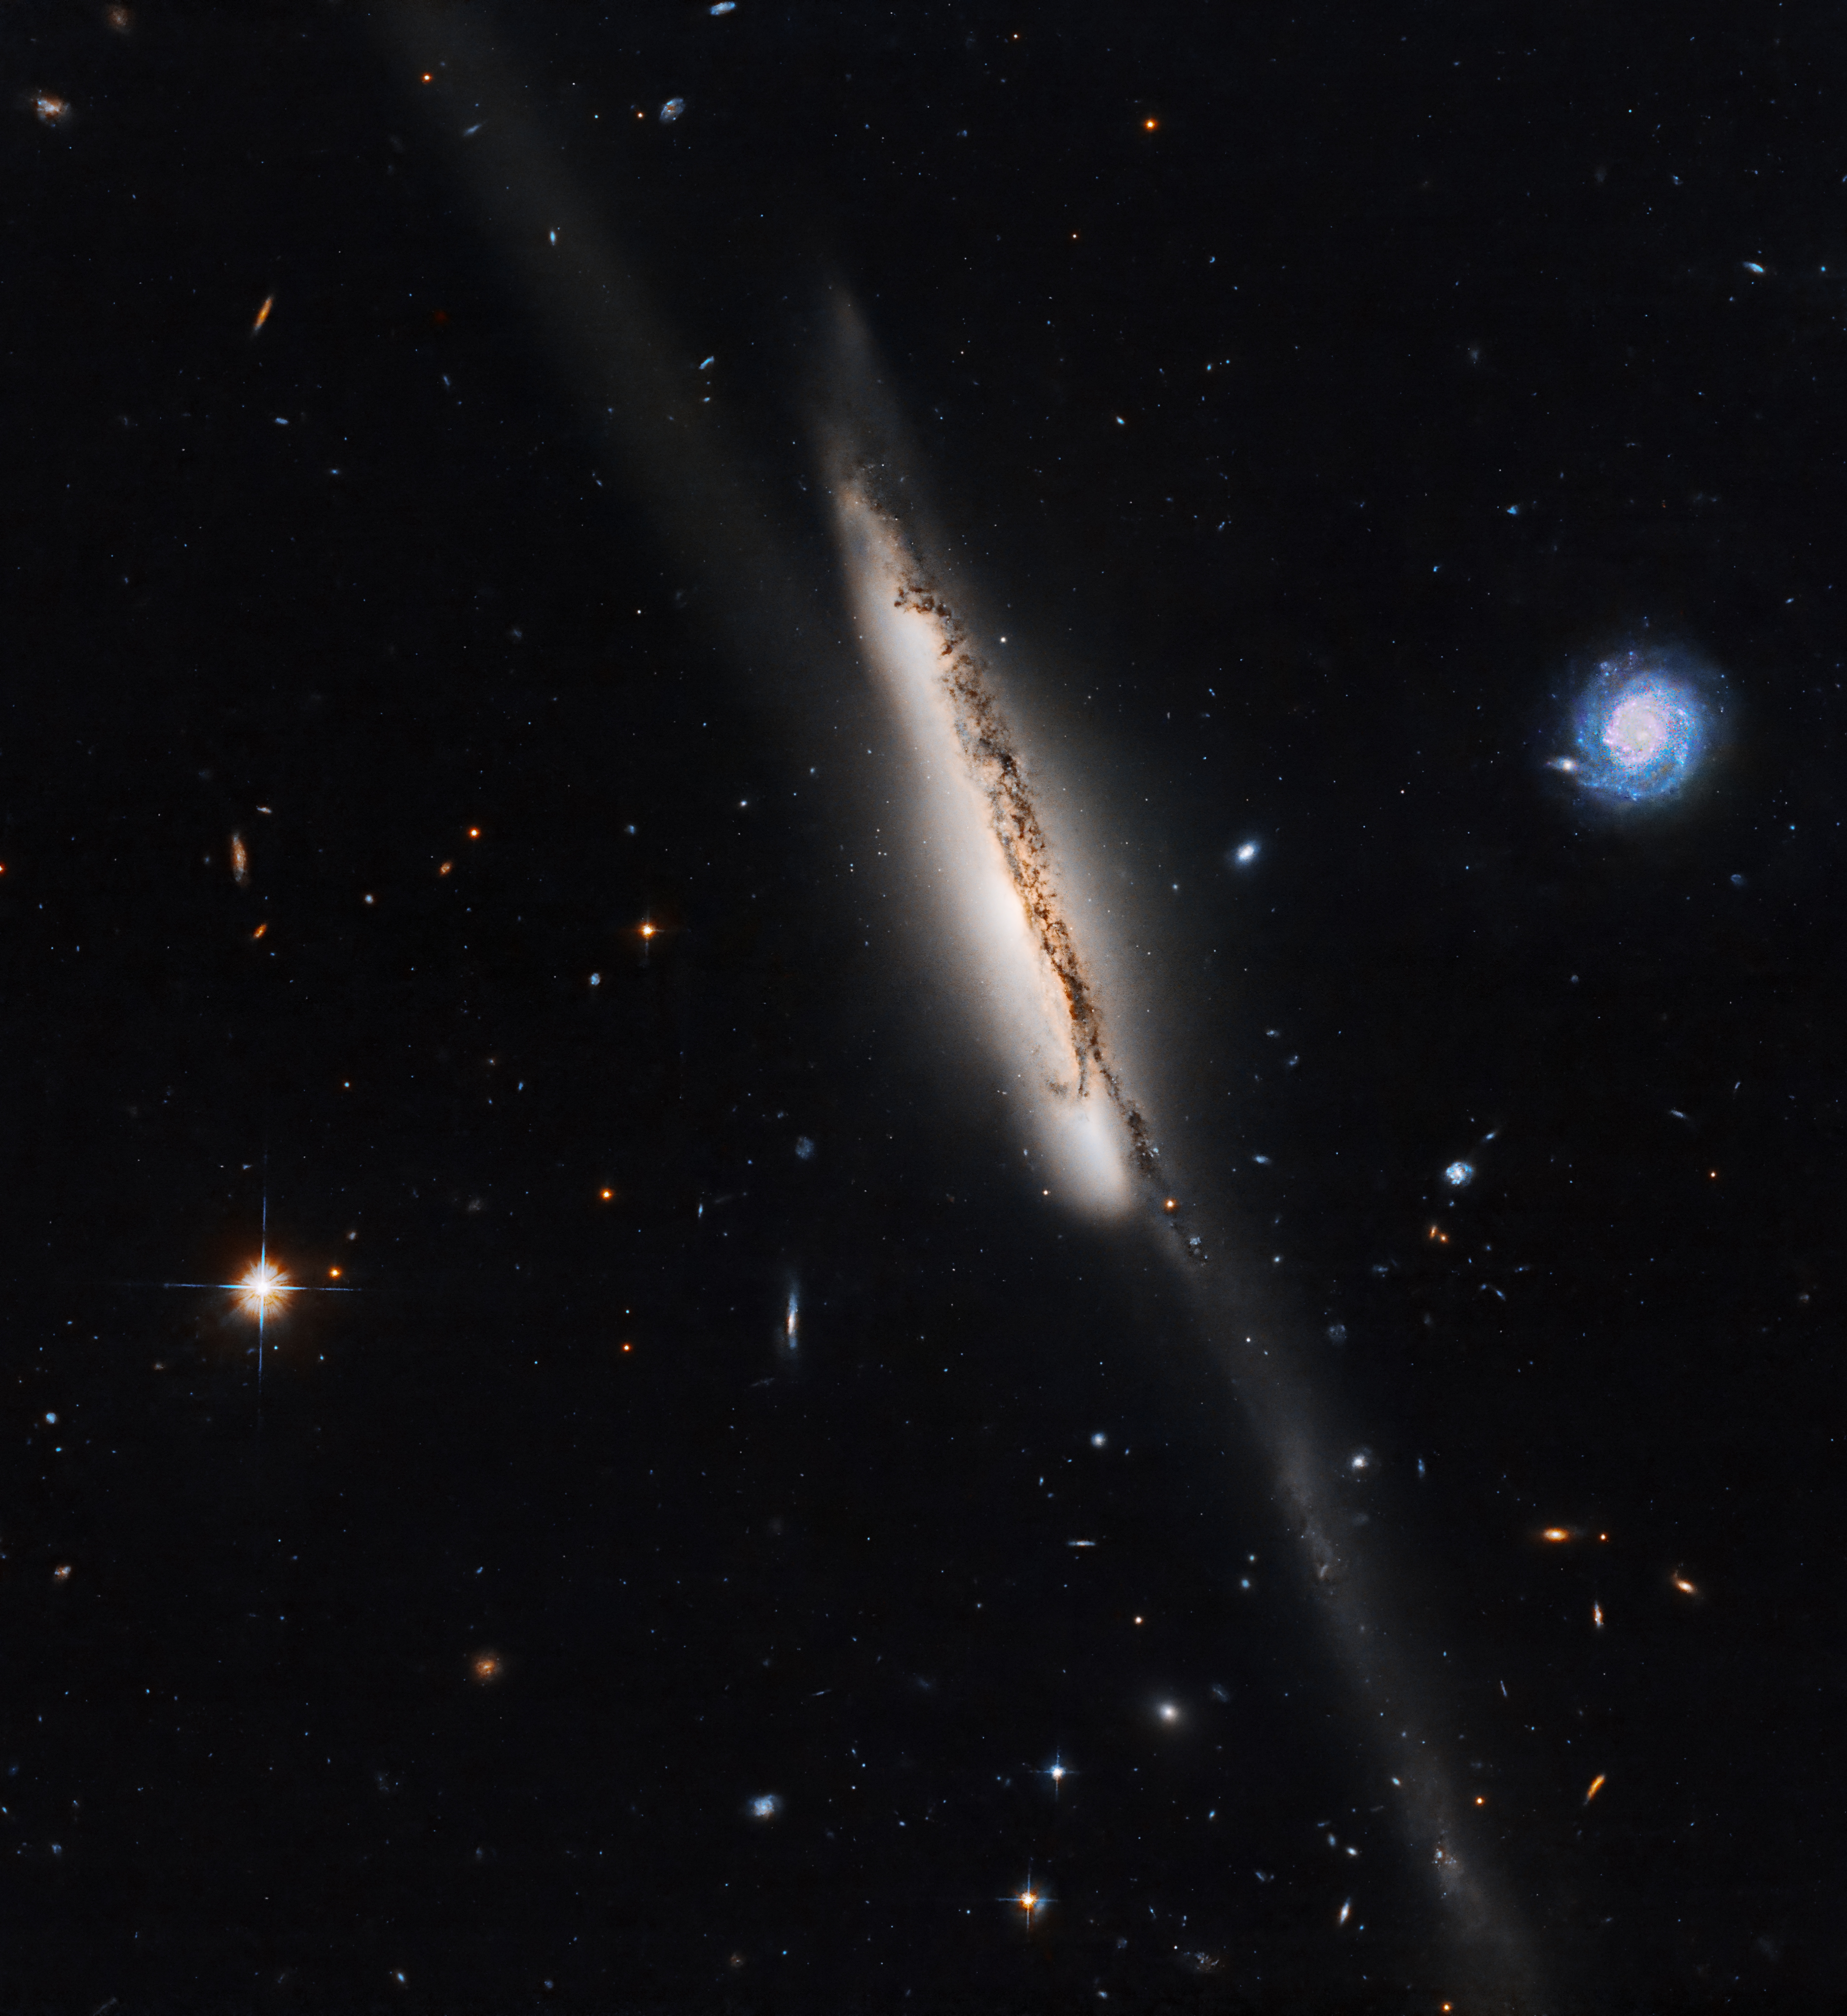 A galaxy laced through with dark brown dust is viewed edge-on, shining against black space dotted with more distant galaxies. The central galaxy has a hazy bridge of faint stars extending down through the bottom of the image.